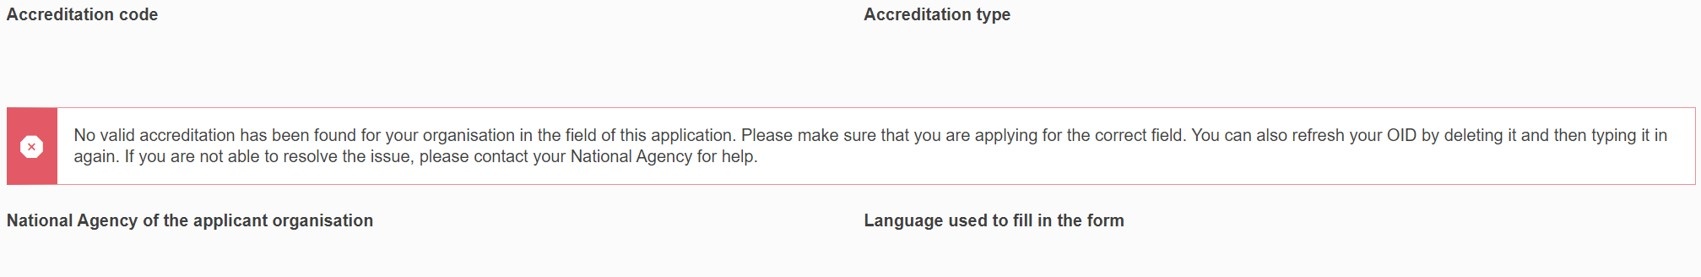 No valid accredation found for your organisation